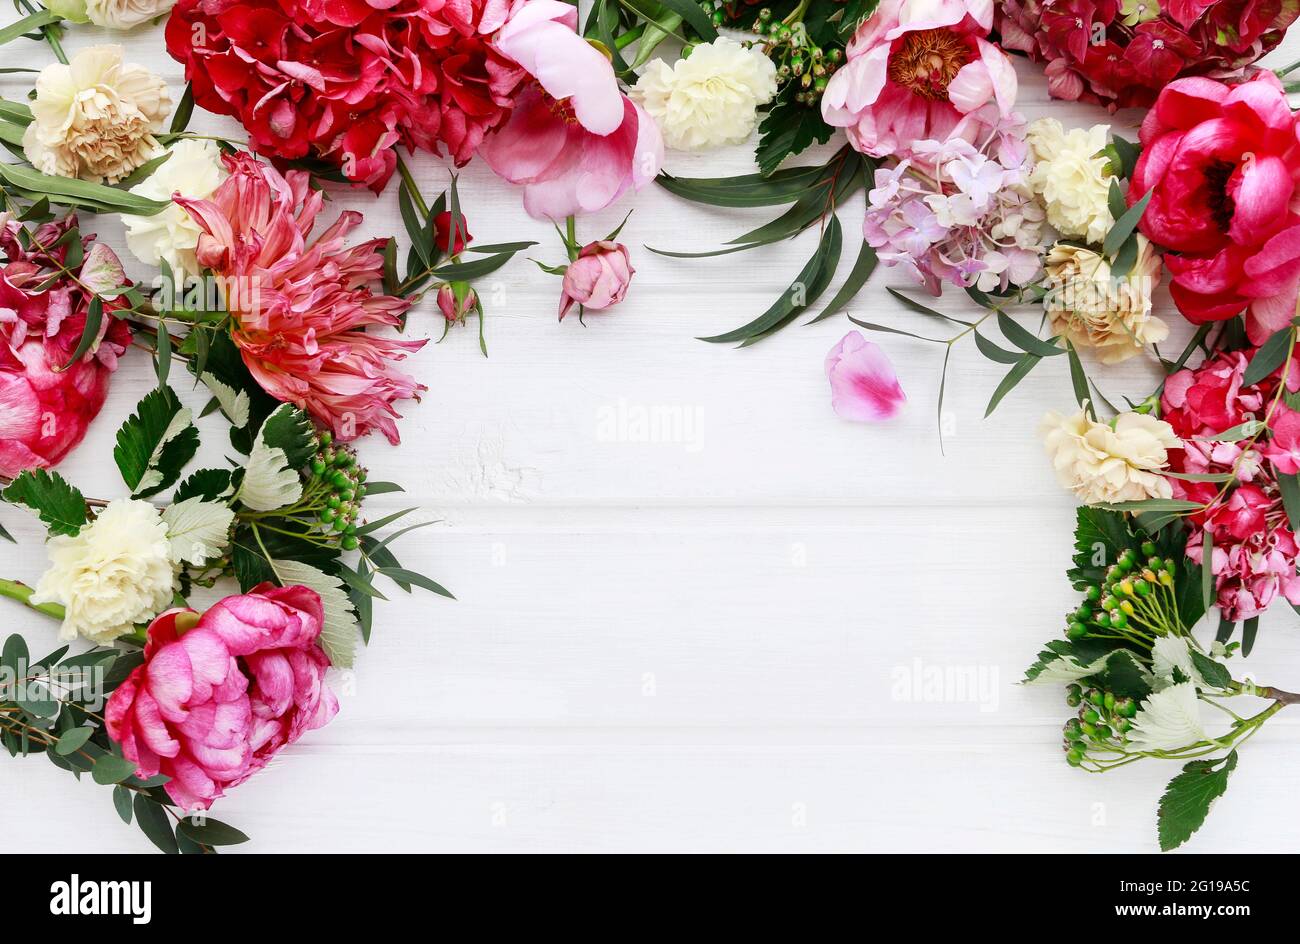 Romantic flower ornament with rose, dahlia, hortensia and carnation flowers. Wooden background, copy space. Stock Photo